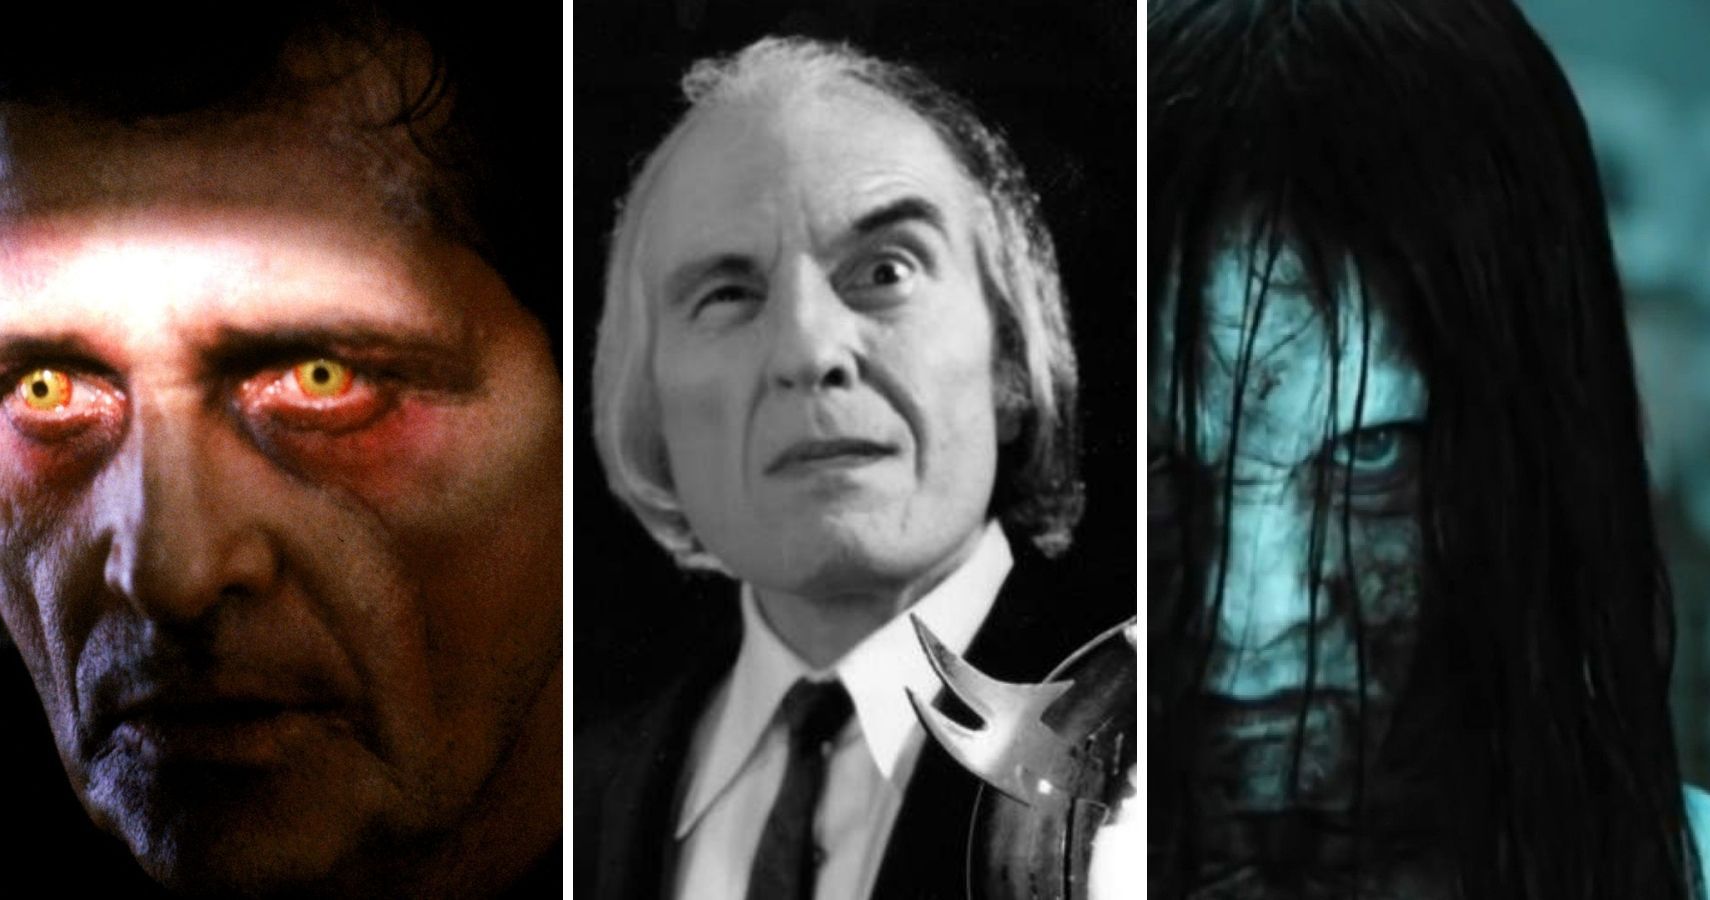 10 Scariest Horror Movies You Can Watch For Free On Crackle